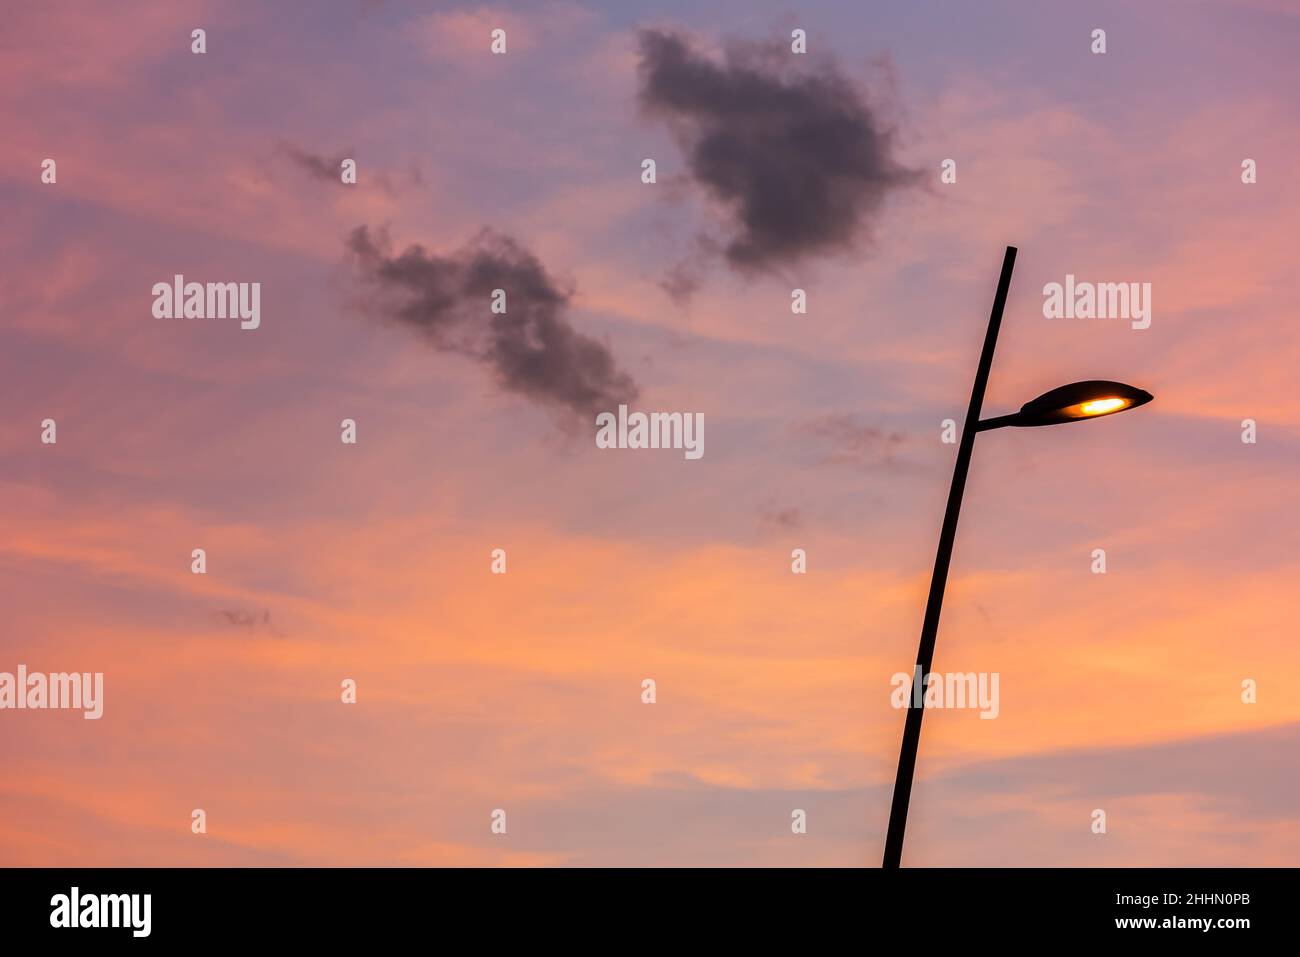 Street lamp silhouetted against an orange sunset sky with lilac colored clouds in a full frame background Stock Photo